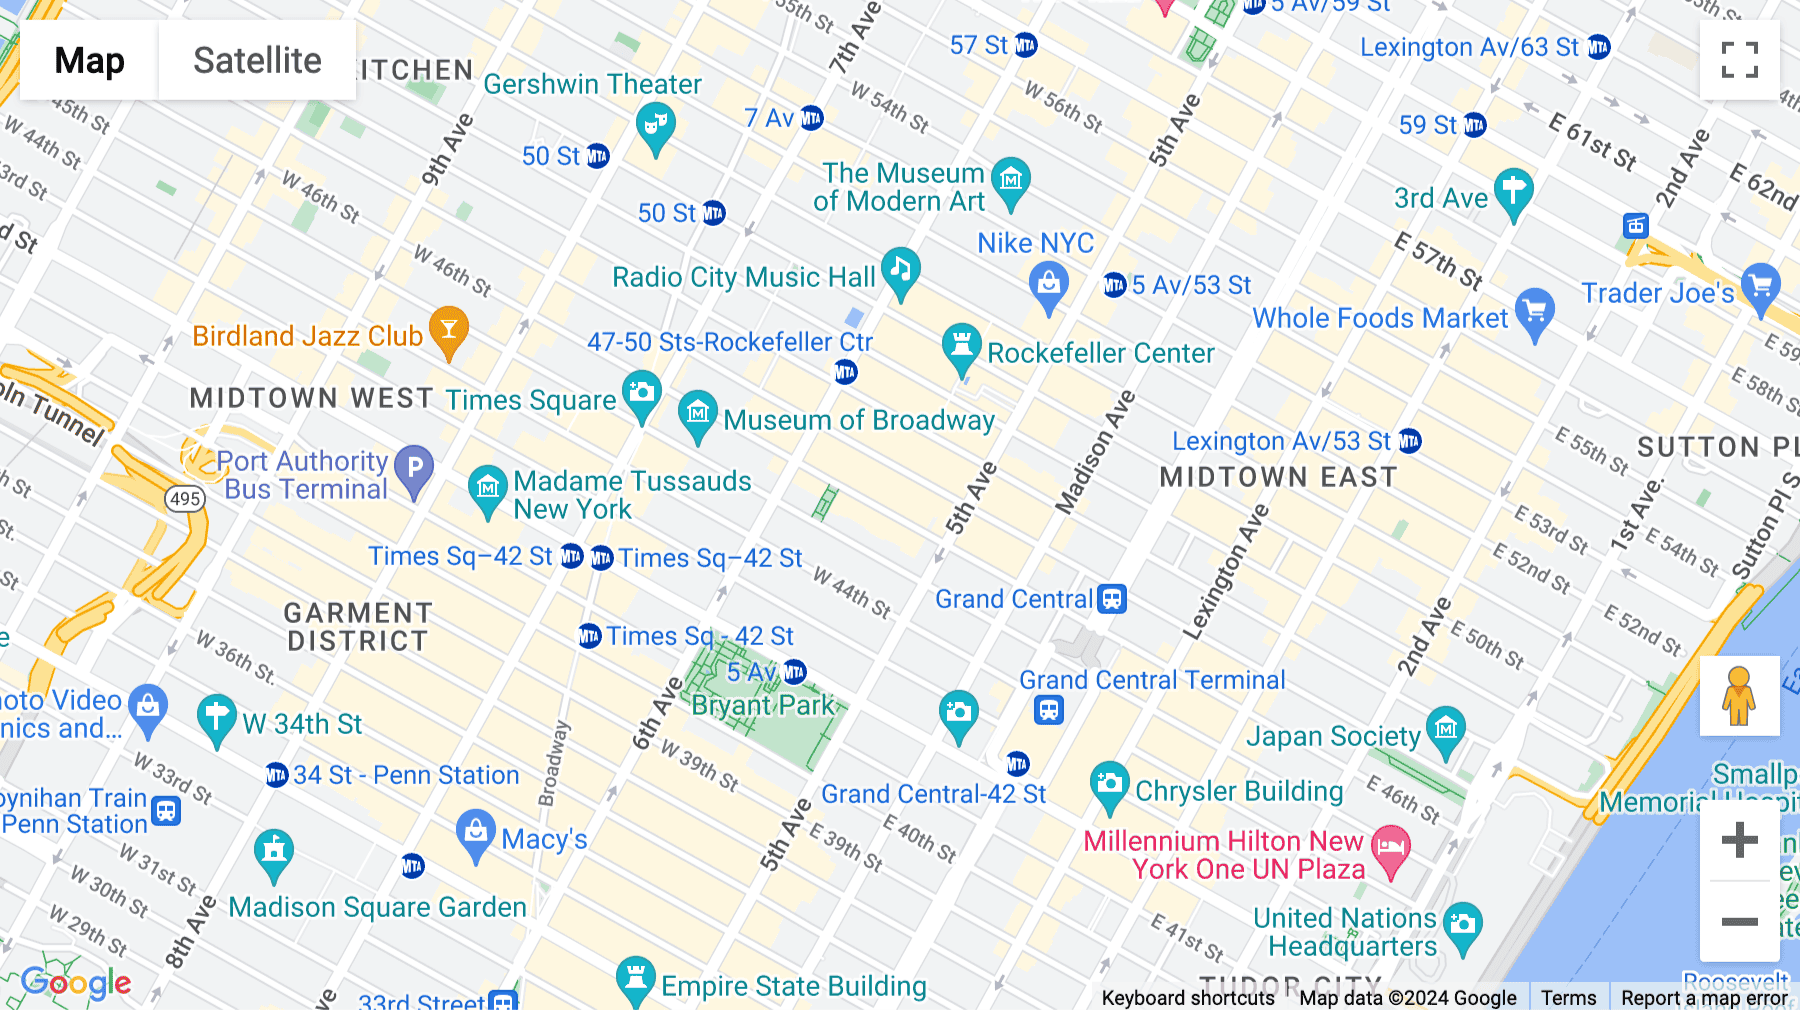 Click for interative map of 21 West 46th Street, New York City